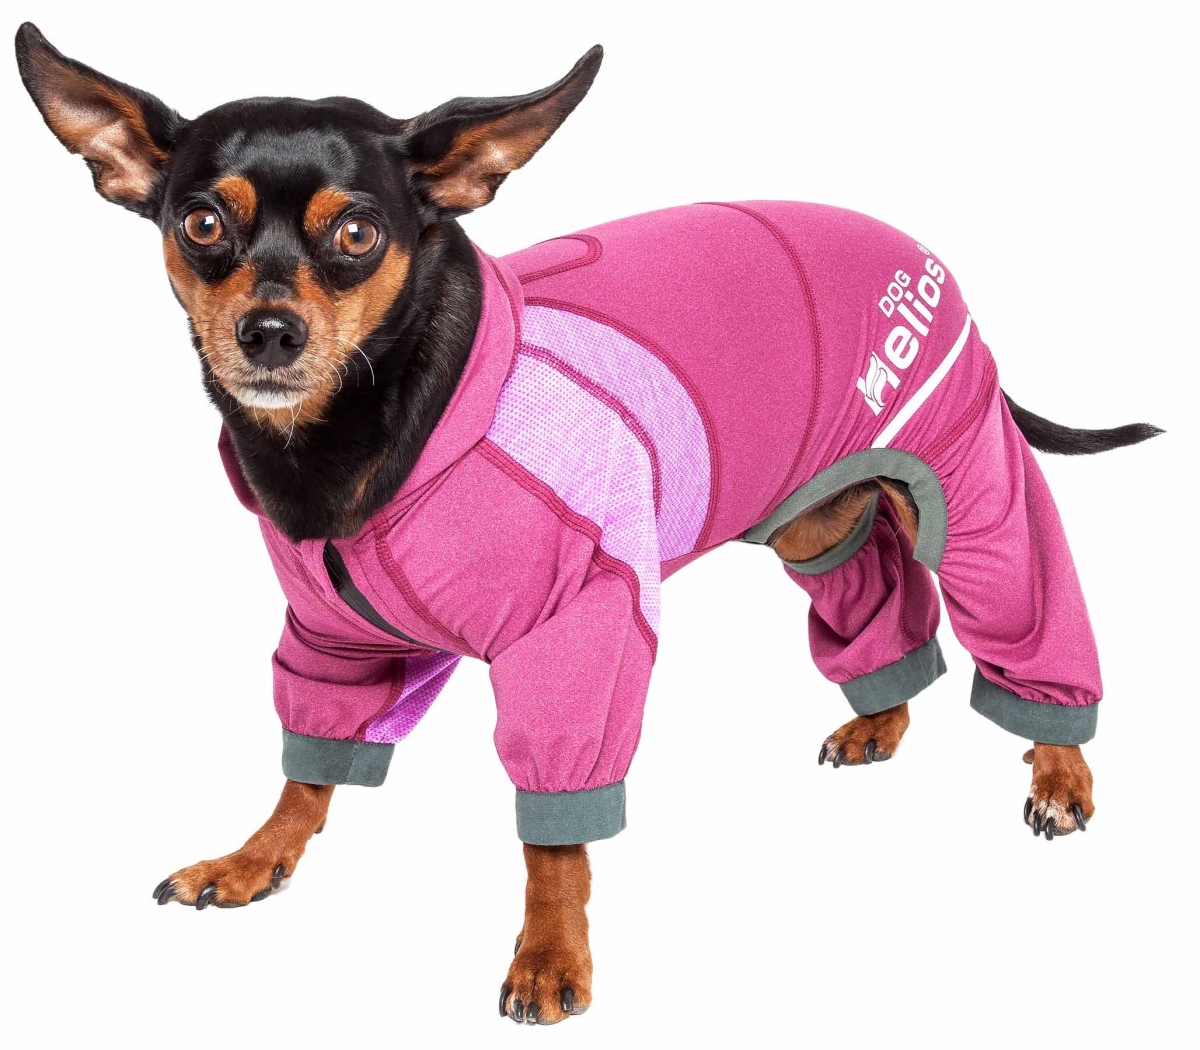 Yghl7pkmd Namastail 4-way Stretch Breathable Full Bodied Performance Yoga Dog Hoodie Tracksuit - Pink, Medium